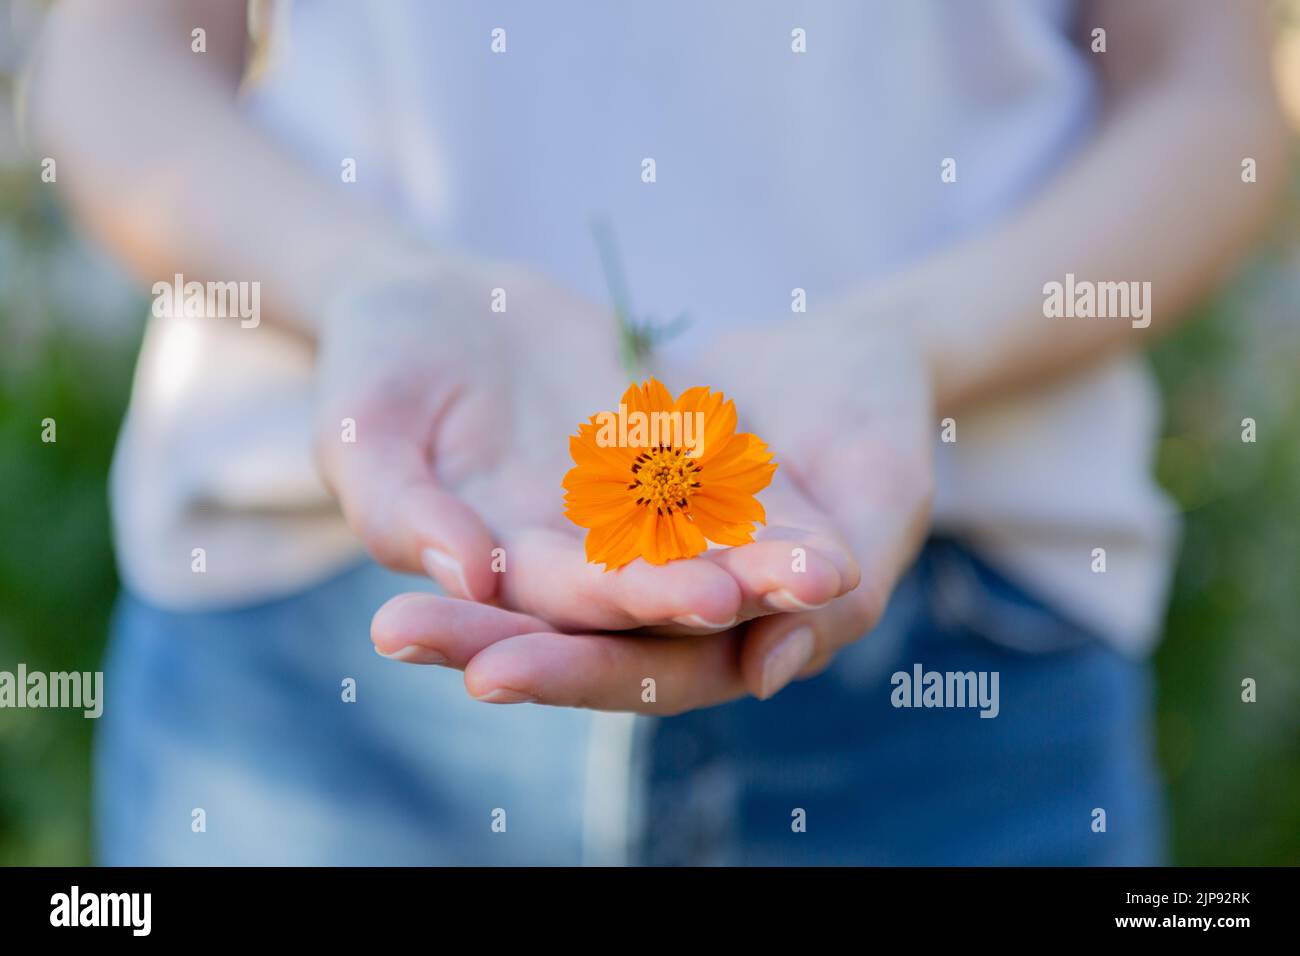 Young woman is holding an orange flower. Stock Photo